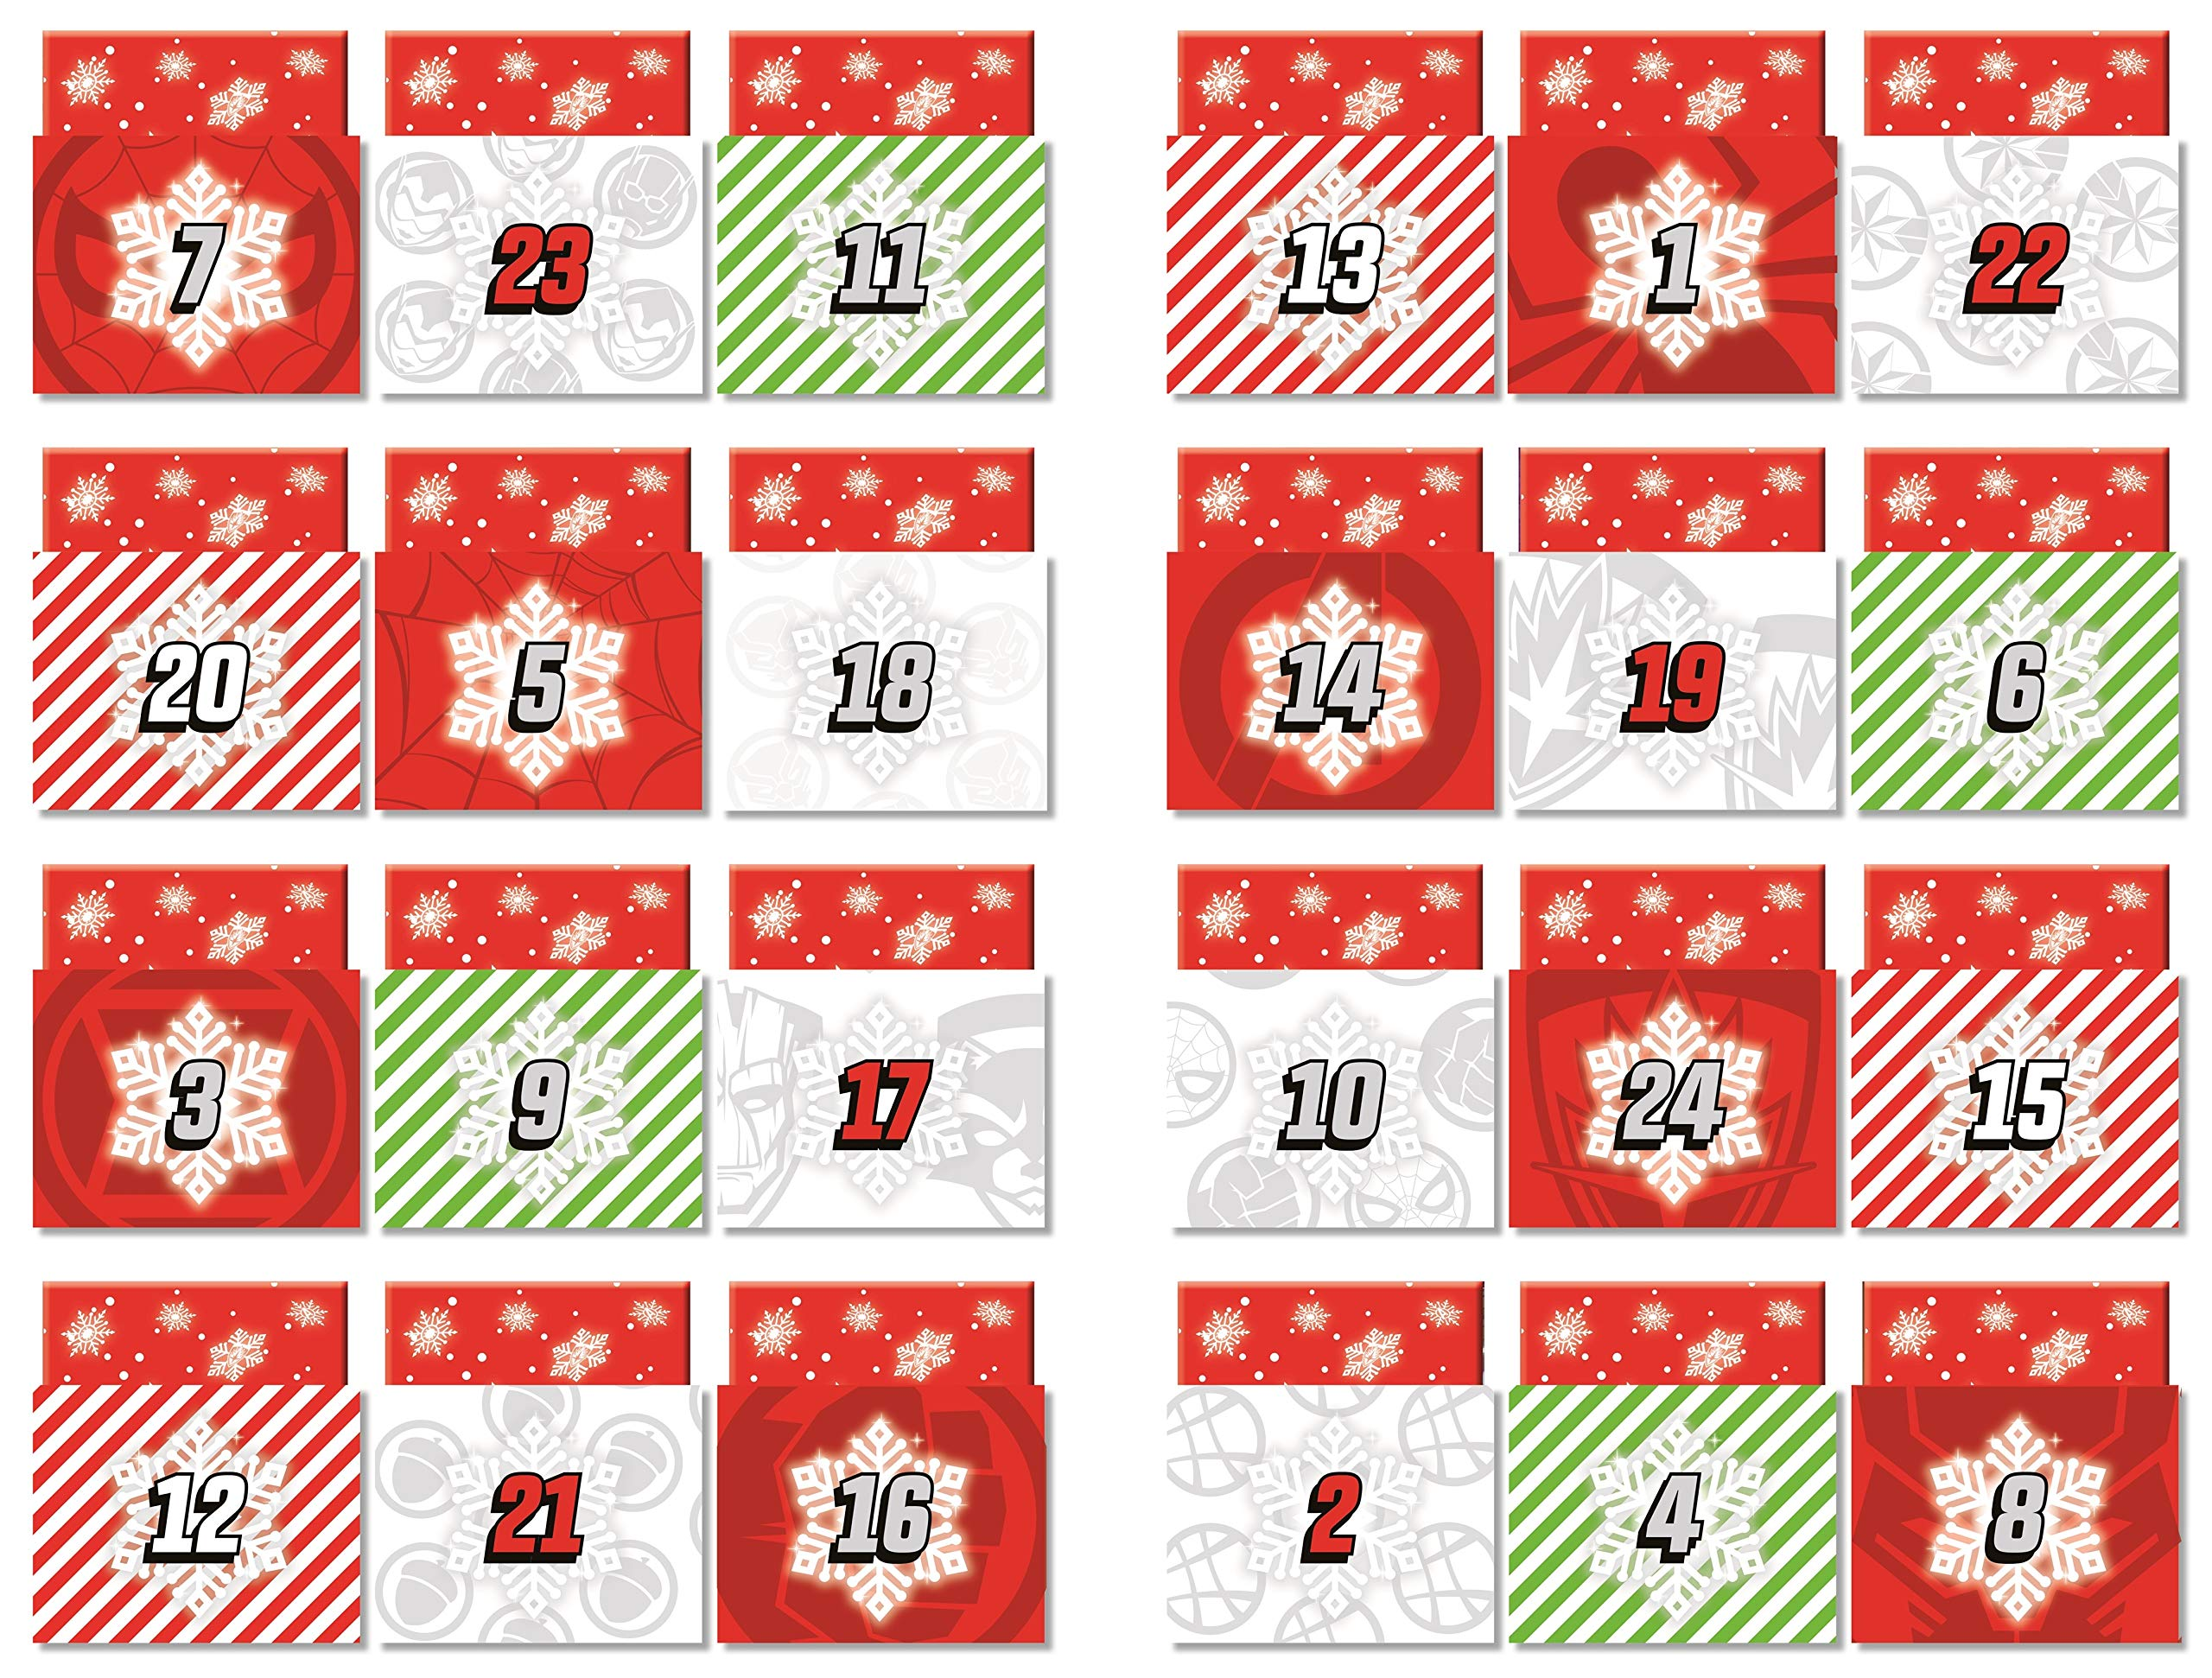 Best Kids Advent Calendars for 2021! hello subscription